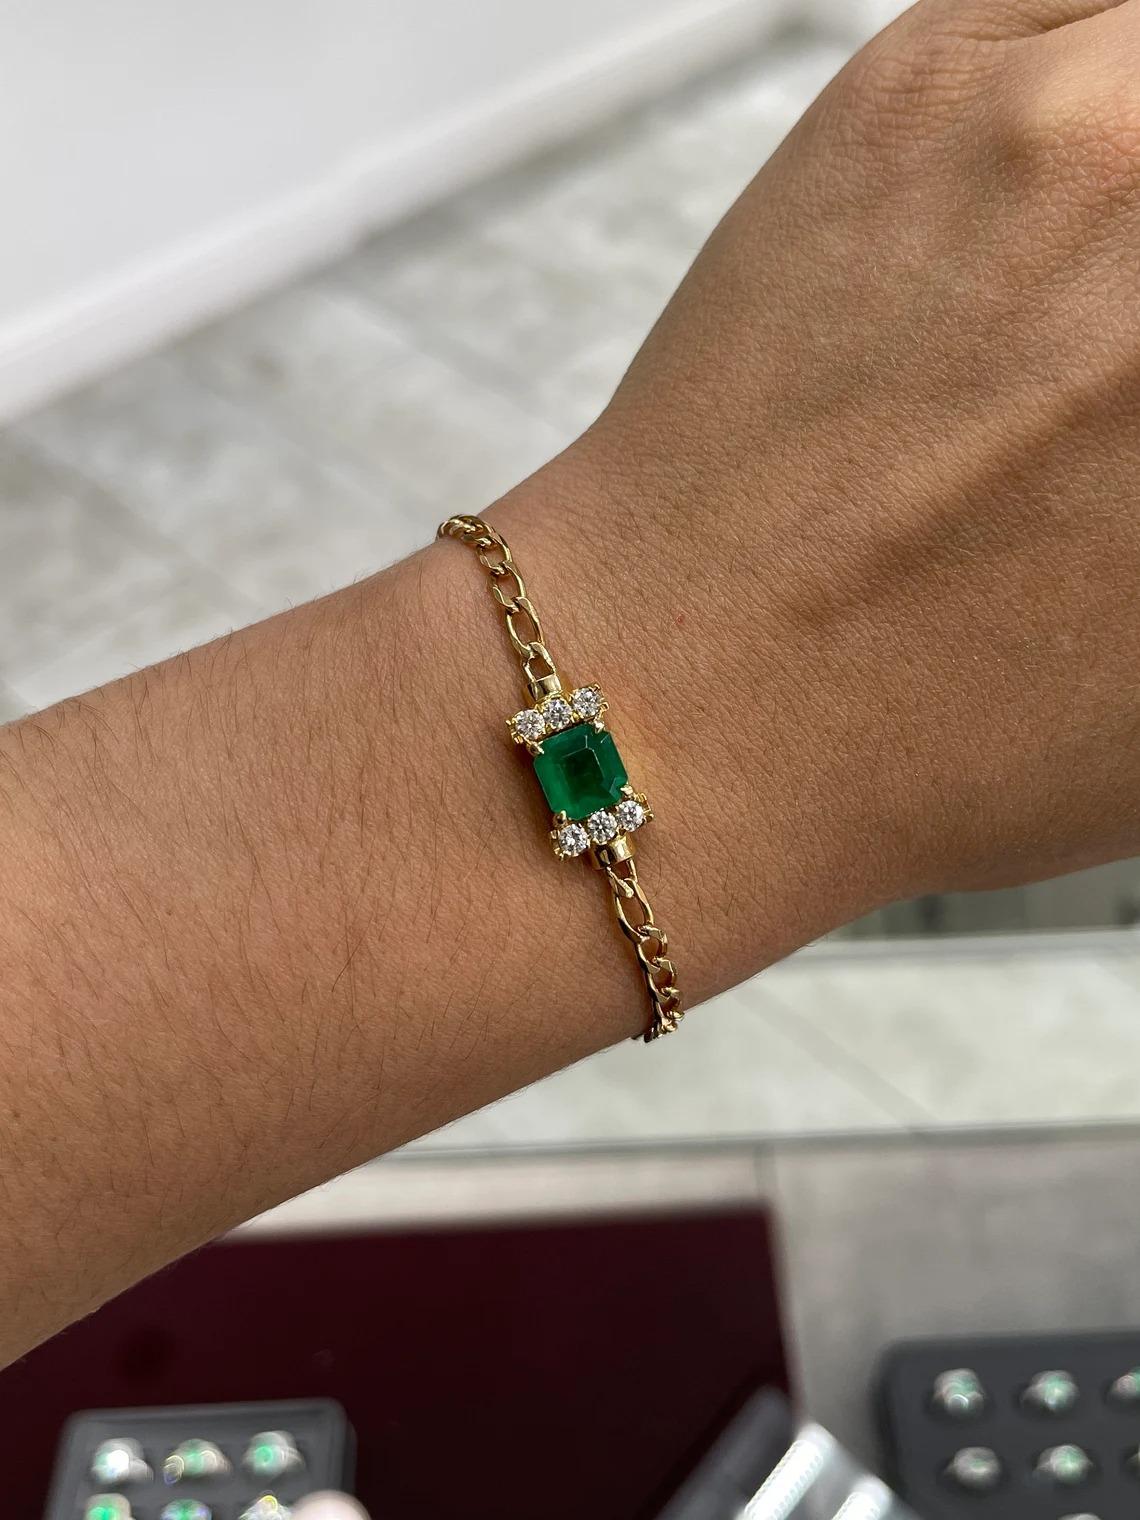 A remarkable emerald and diamond bracelet. The center stone features a four-prong set high-quality, AAA Colombian emerald weighing in at 2.89-carats; displaying a desirable vivid, rich, yellowish-green color and excellent luster. Accenting the